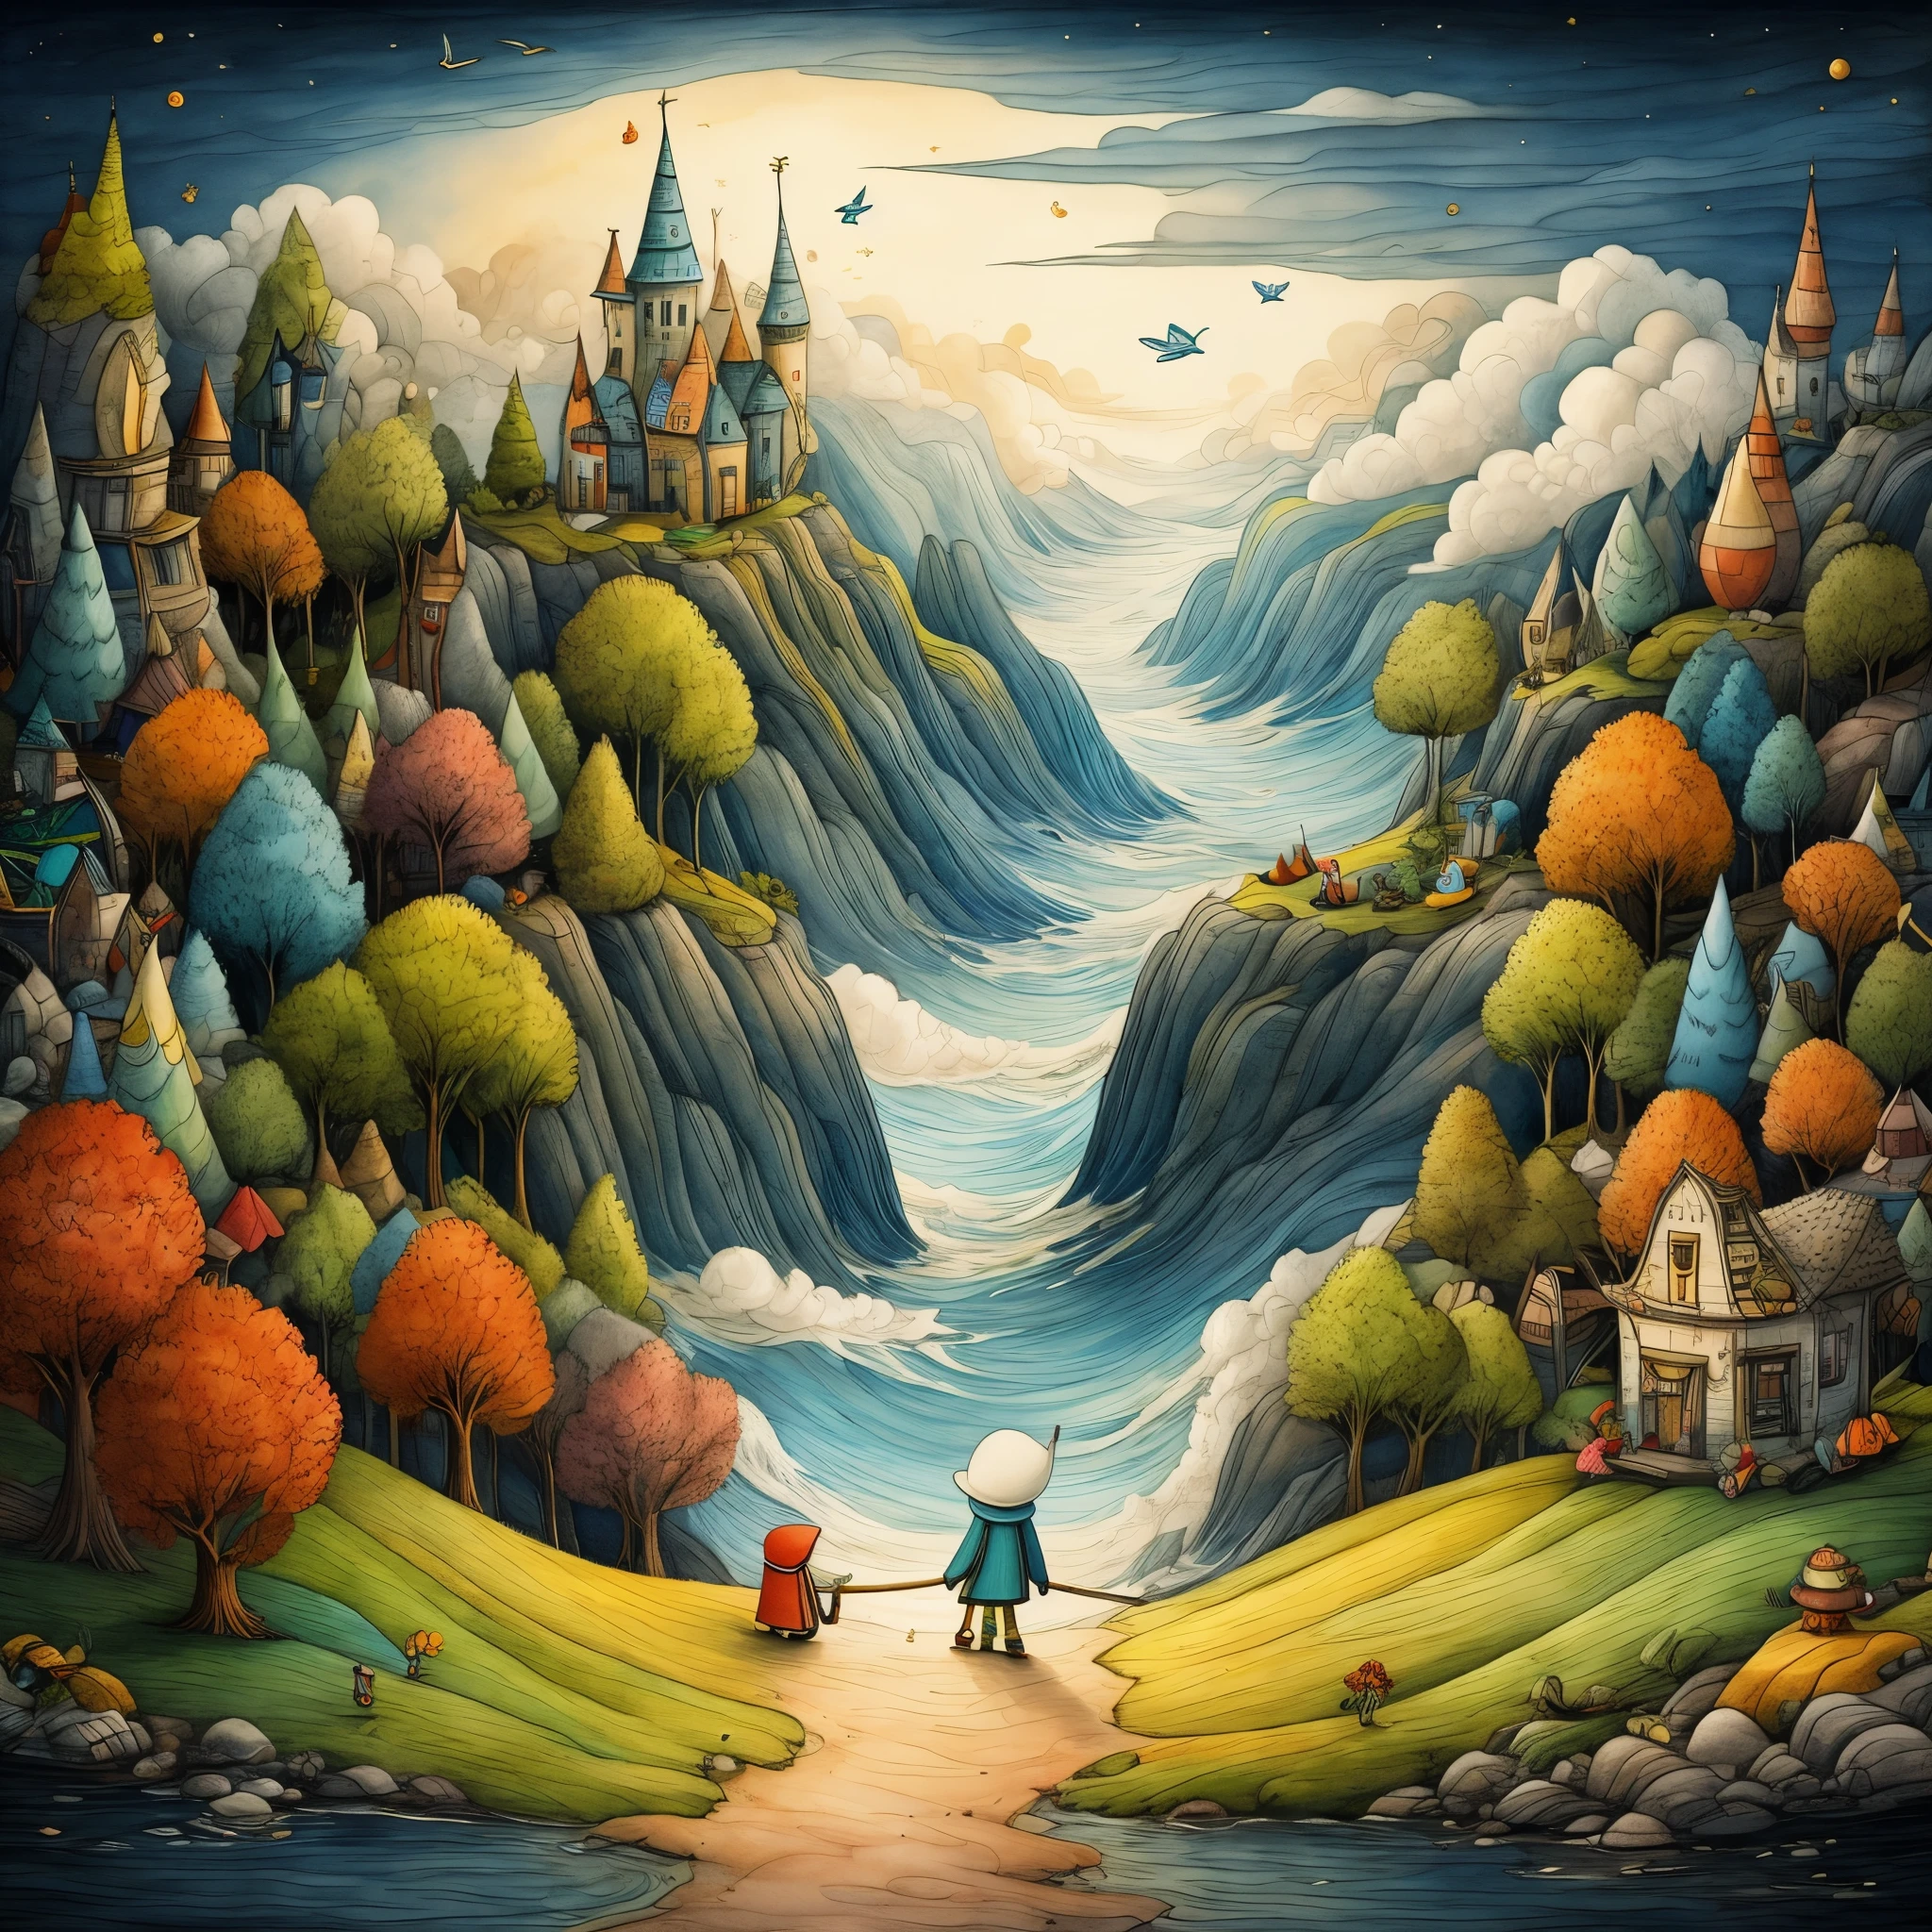 This picture represents the moment when the main character steps into the mysterious world of clouds. A character with a facial expression that conveys excitement and surprise.

The painting depicts a part of a fairyland to express the atmosphere of that world. Flying fish, mysterious buildings, and colorful landscapes are impressive.

You can incorporate elements that convey the excitement of adventure. For example, a treasure in a character's hand or a scene with a strange tool.

To create visual enjoyment for children, use bright and festive colors. Eye-catching colors are important.

Combine the main character and fairyland elements in a well-balanced manner.